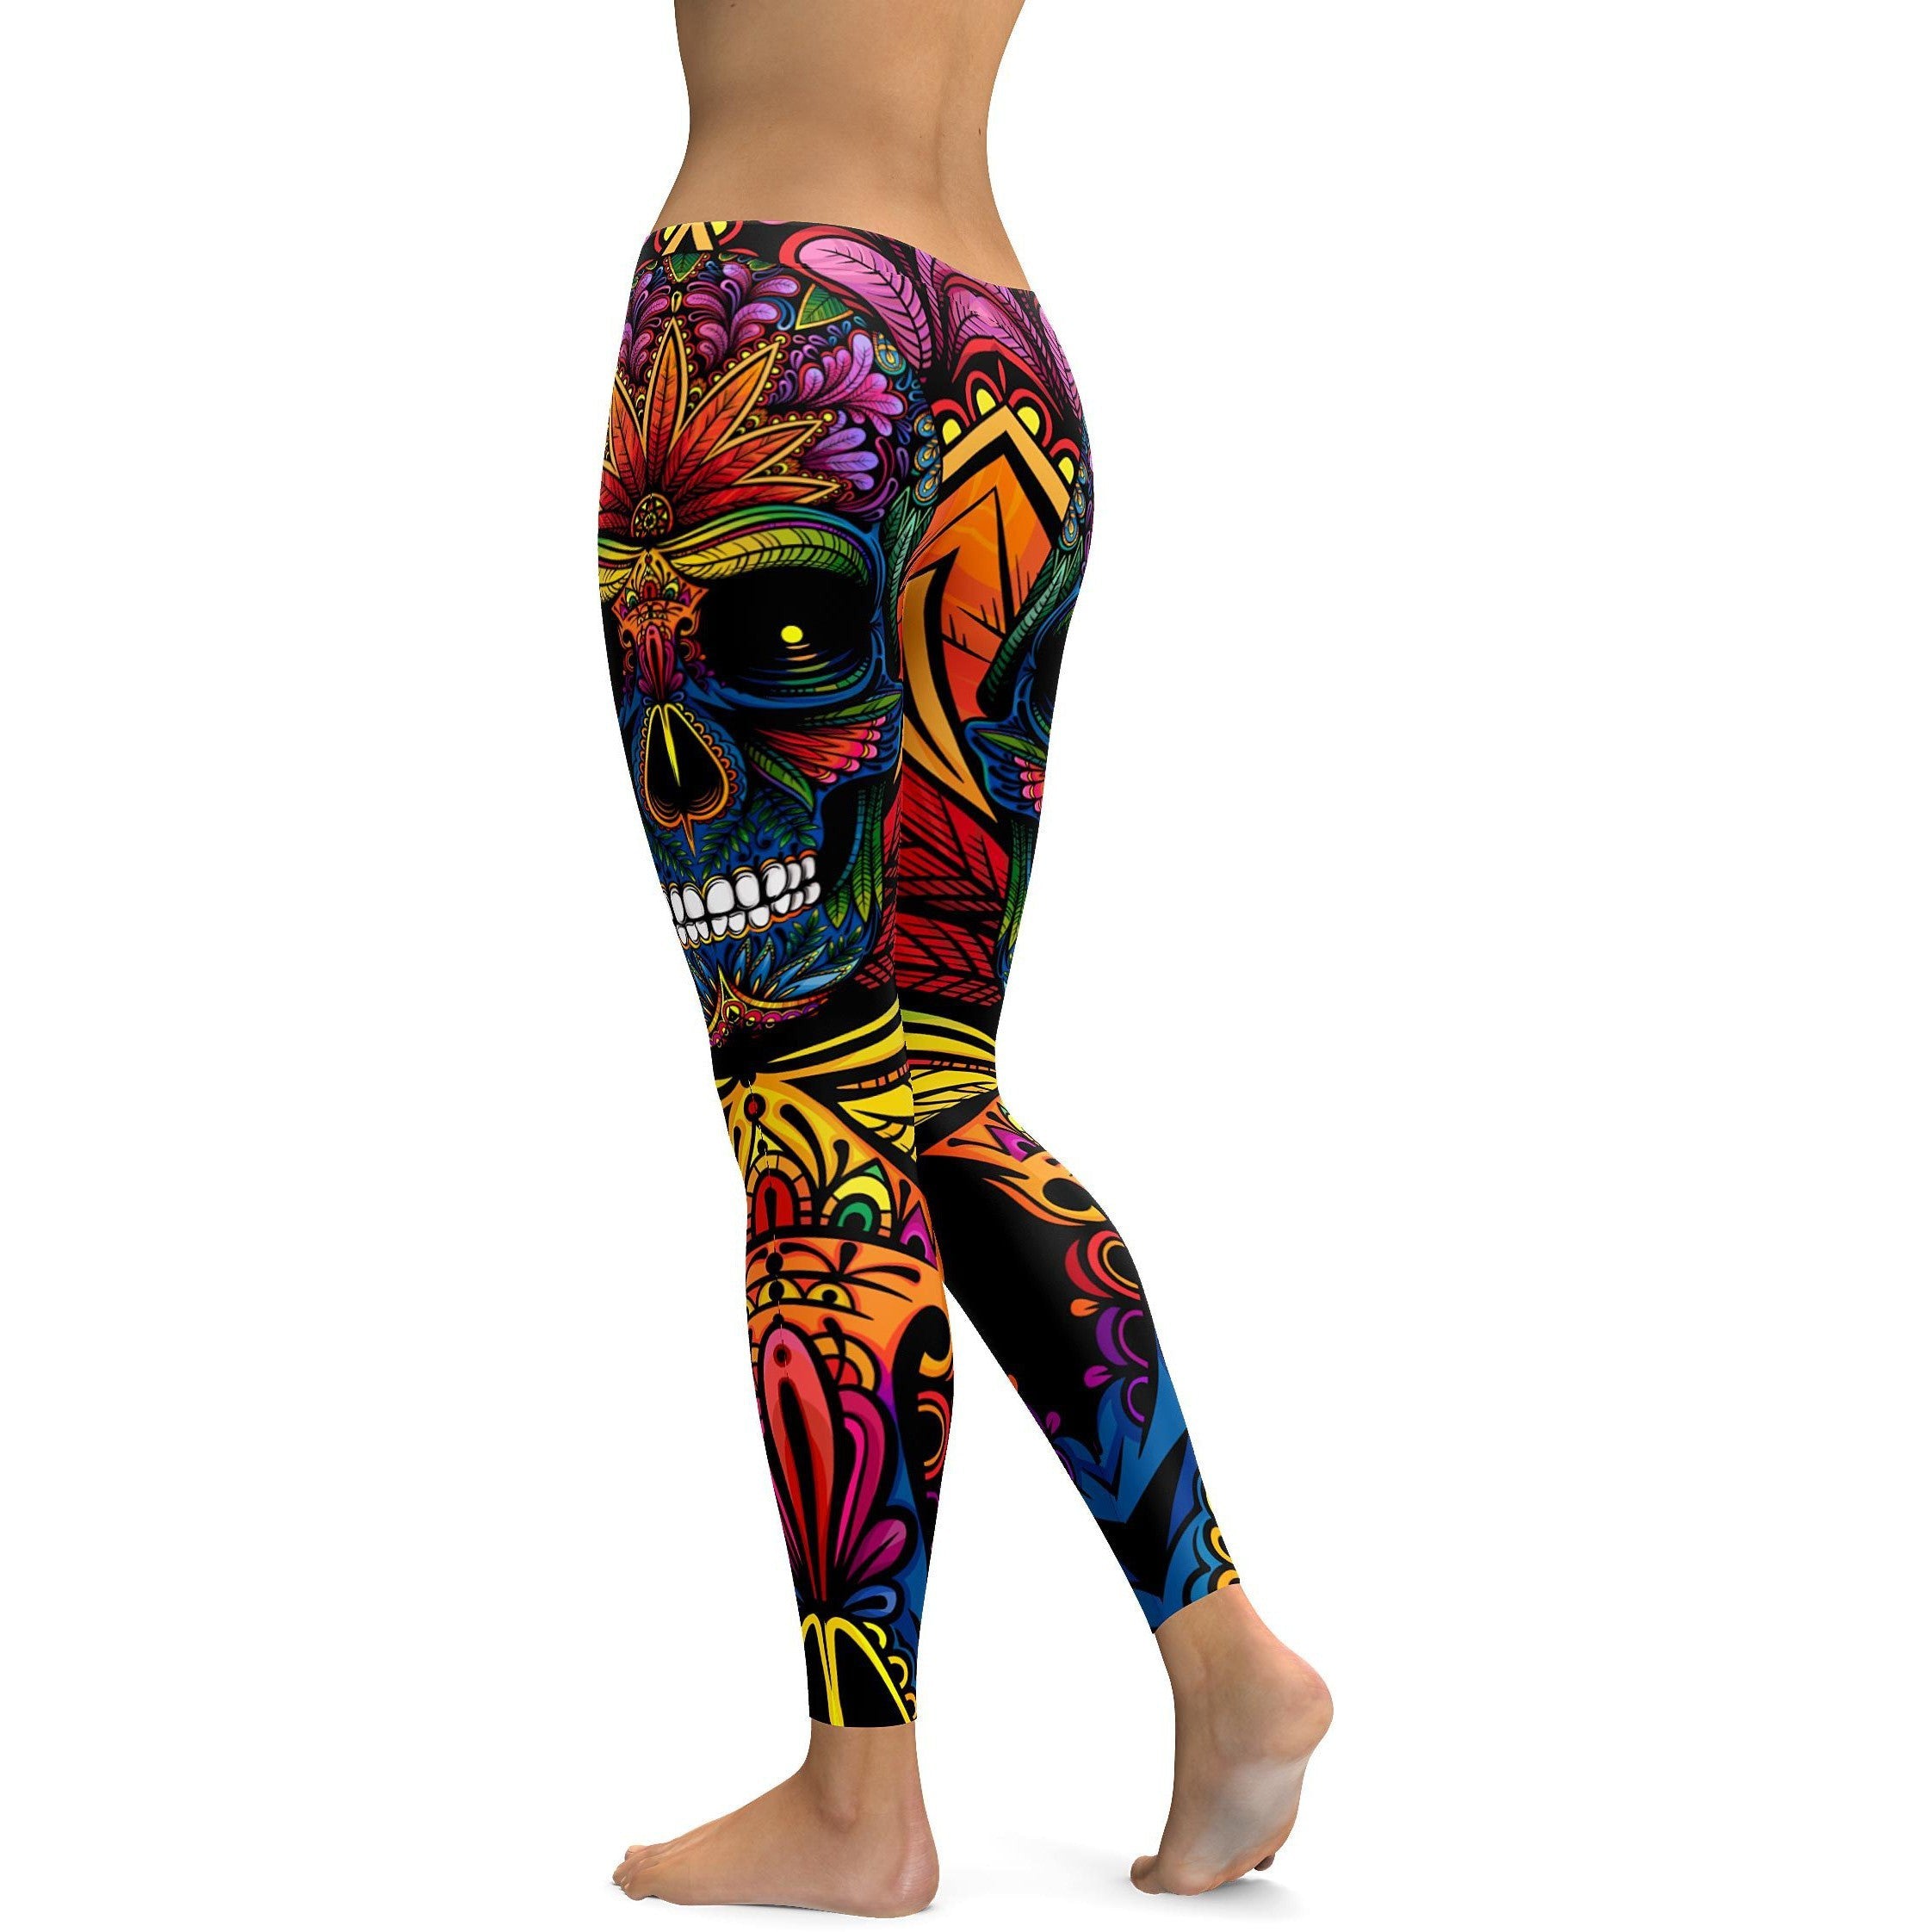 Tights Chalk Coral / Multicolor FM9469 | Casual bottoms, Adidas tights,  Tights